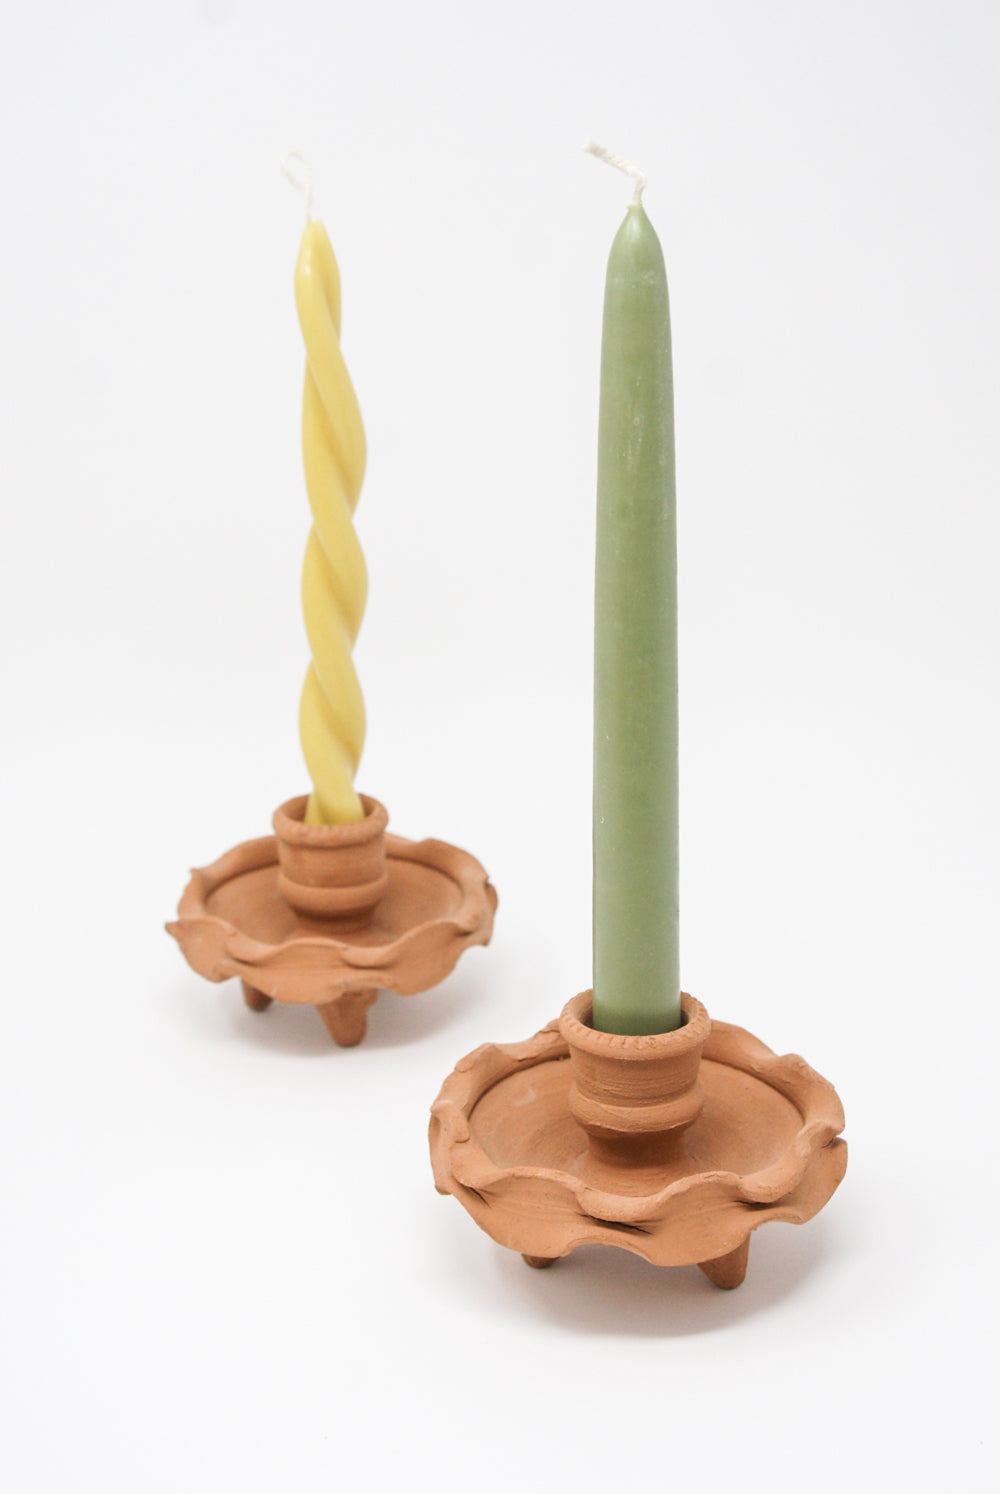 Two Beeswax Dining Candles in Moss holders, one twisted and made of beeswax, the other straight with green tea wax and matcha aroma, against a white background. From Wax Atelier.